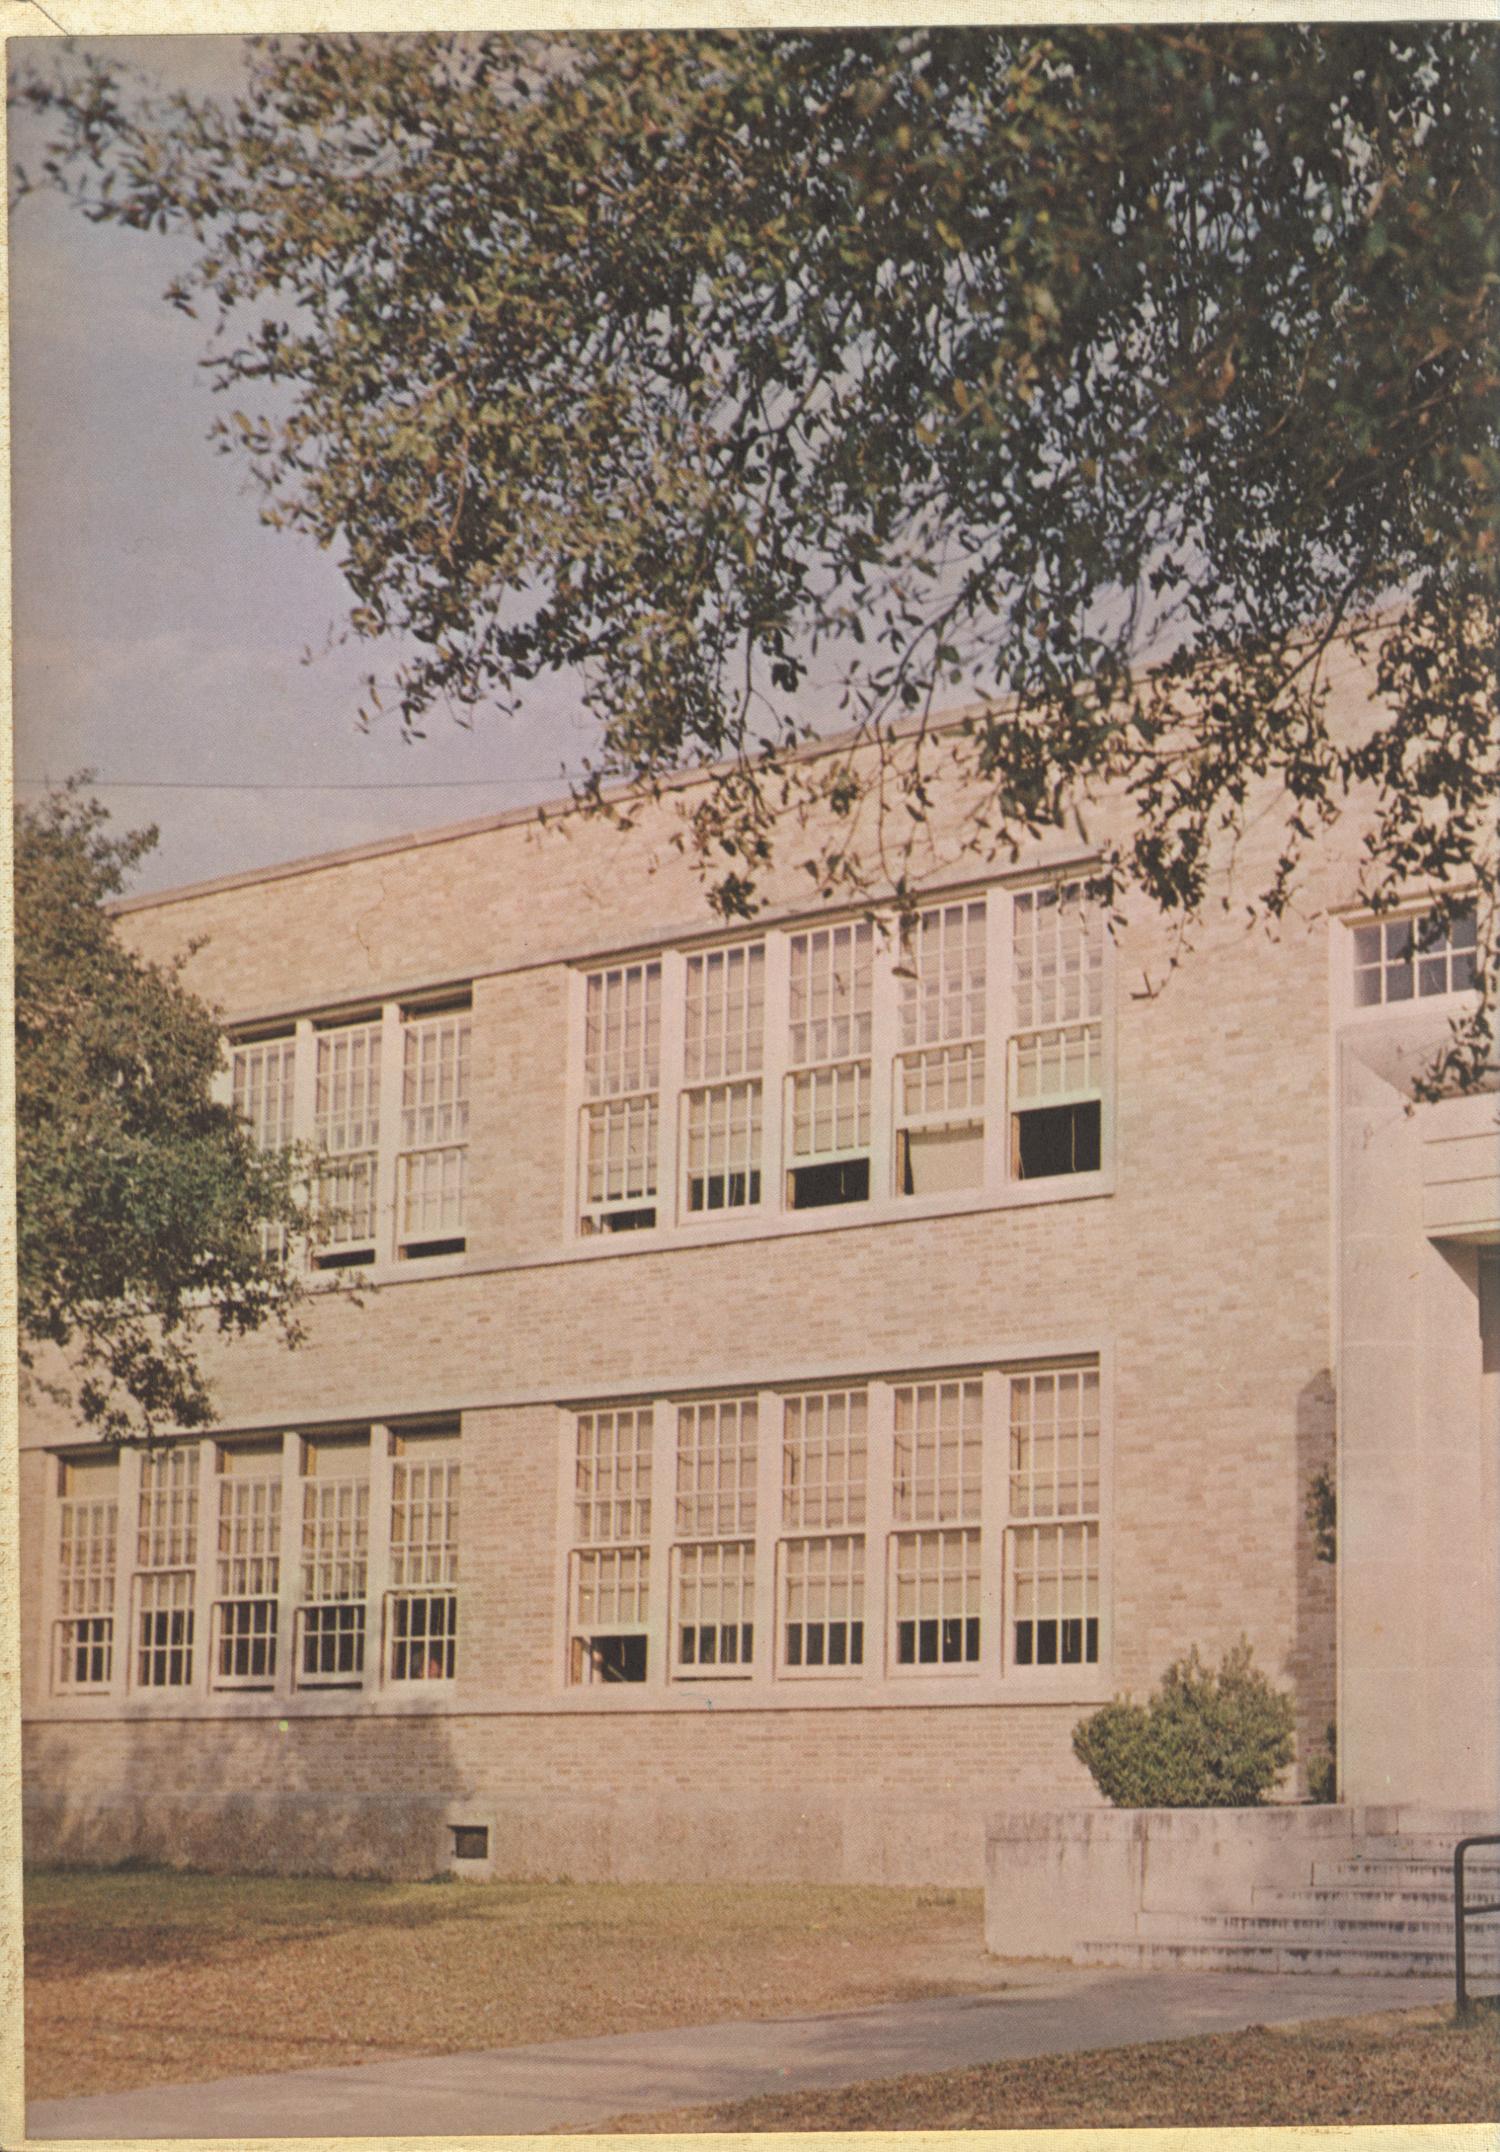 The Eagle, Yearbook of Stephen F. Austin High School, 1968
                                                
                                                    Front Inside
                                                